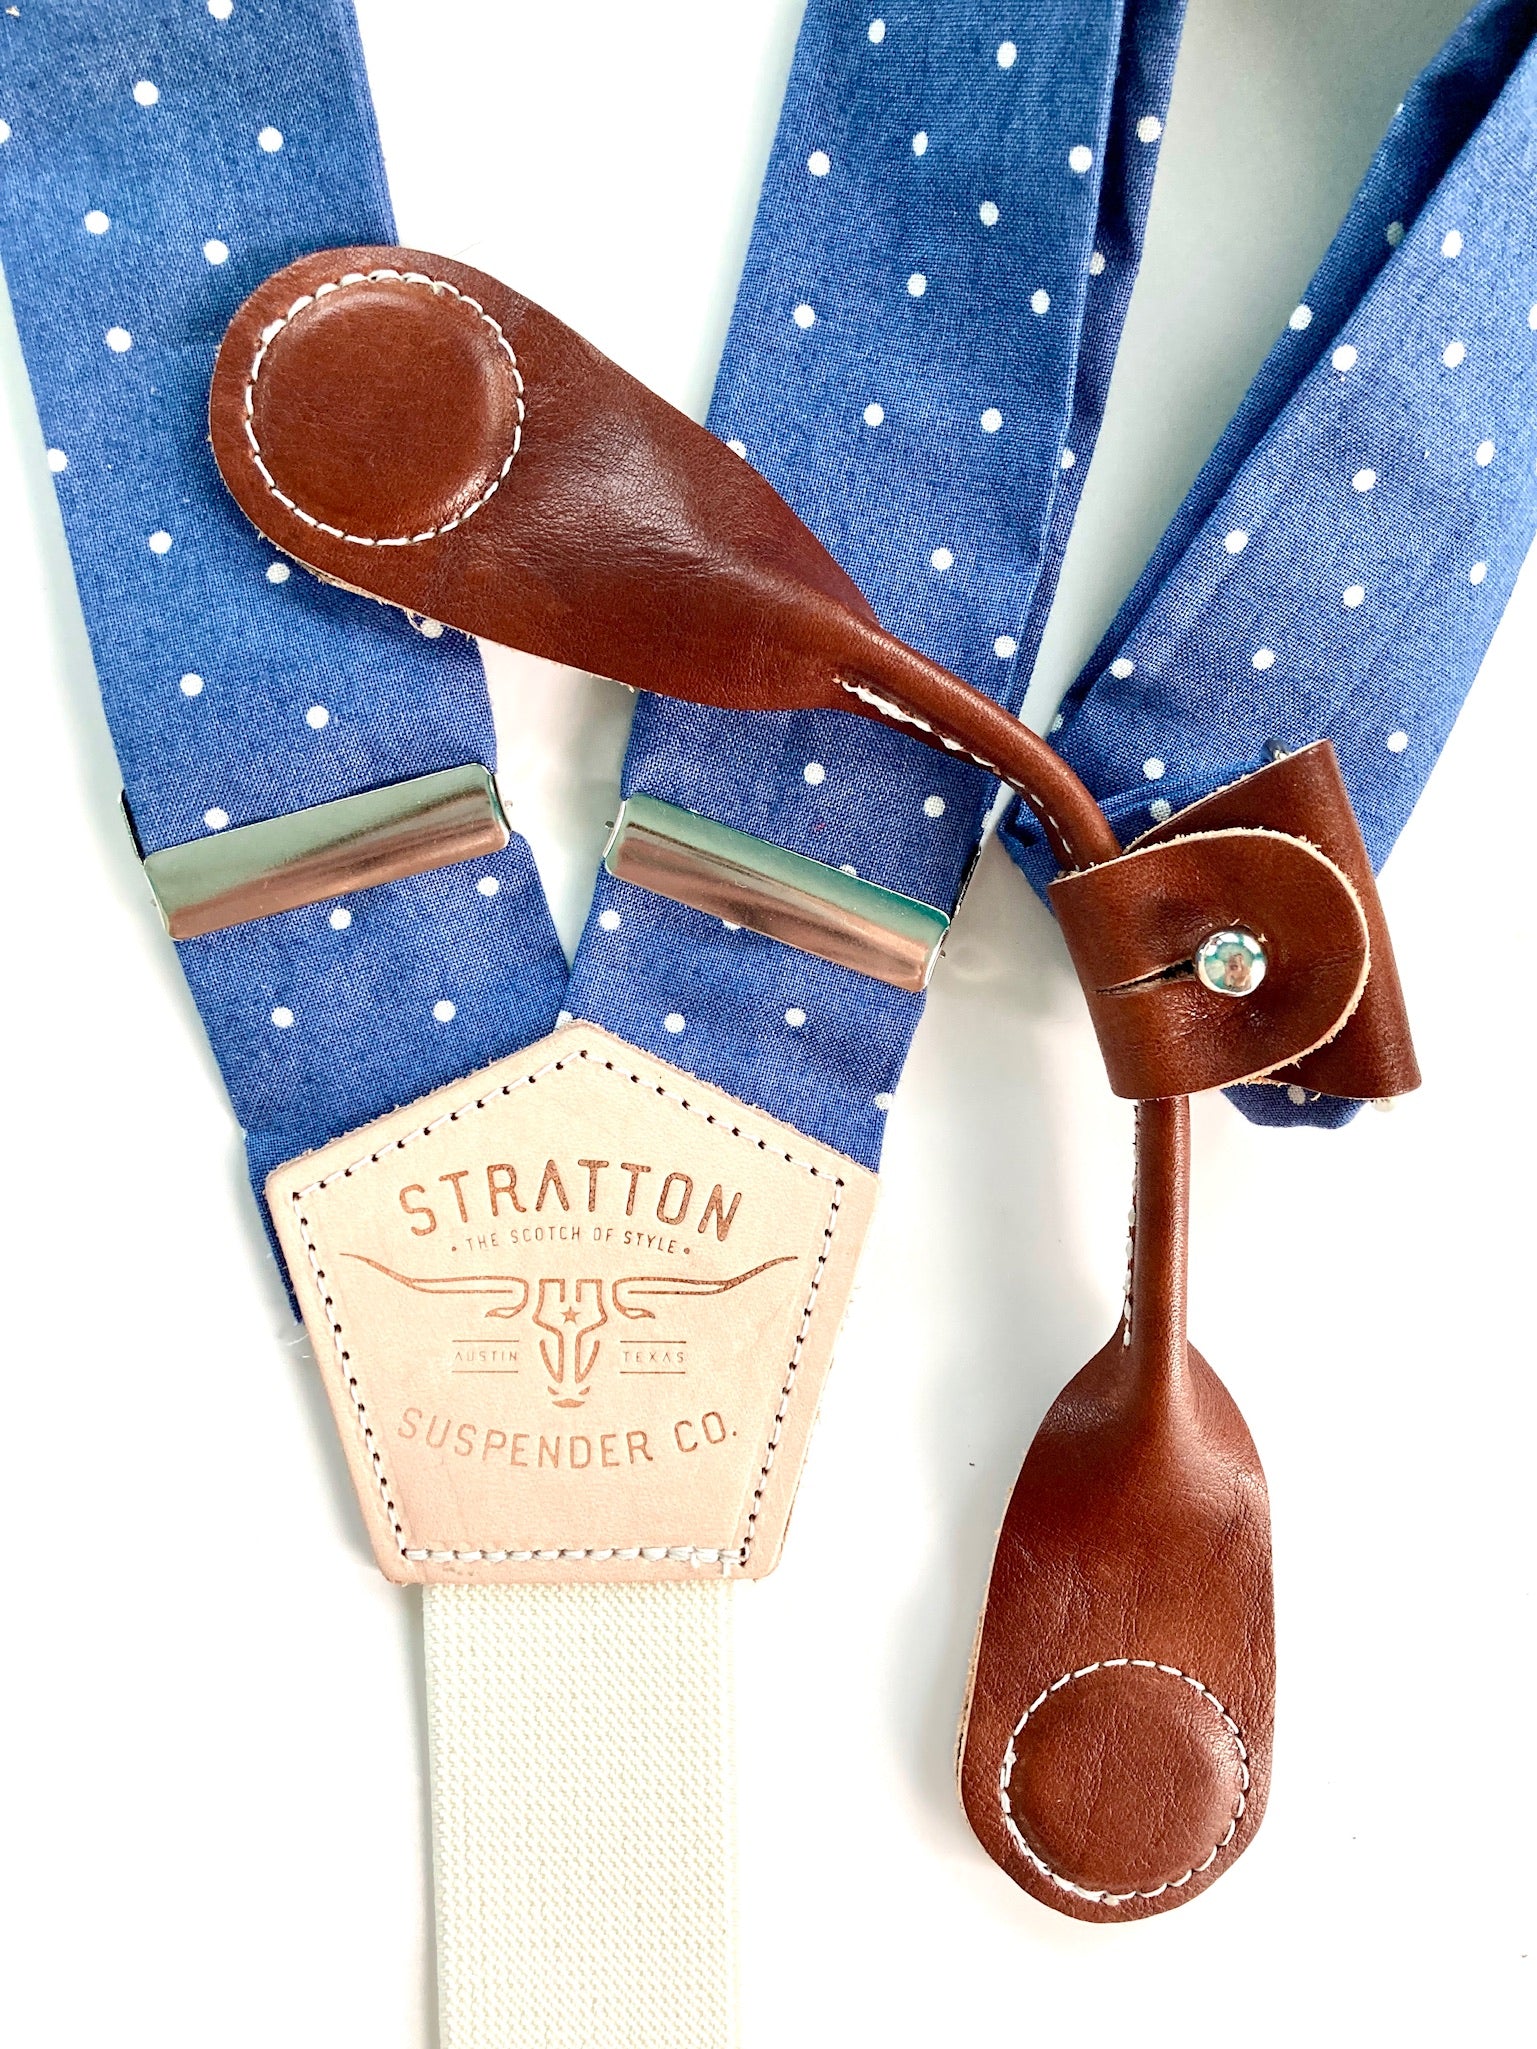 Stratton Suspenders in our Vintage Polka Dot Blue Paired with Cognac Pontedero Leather Magnetic Clasps 